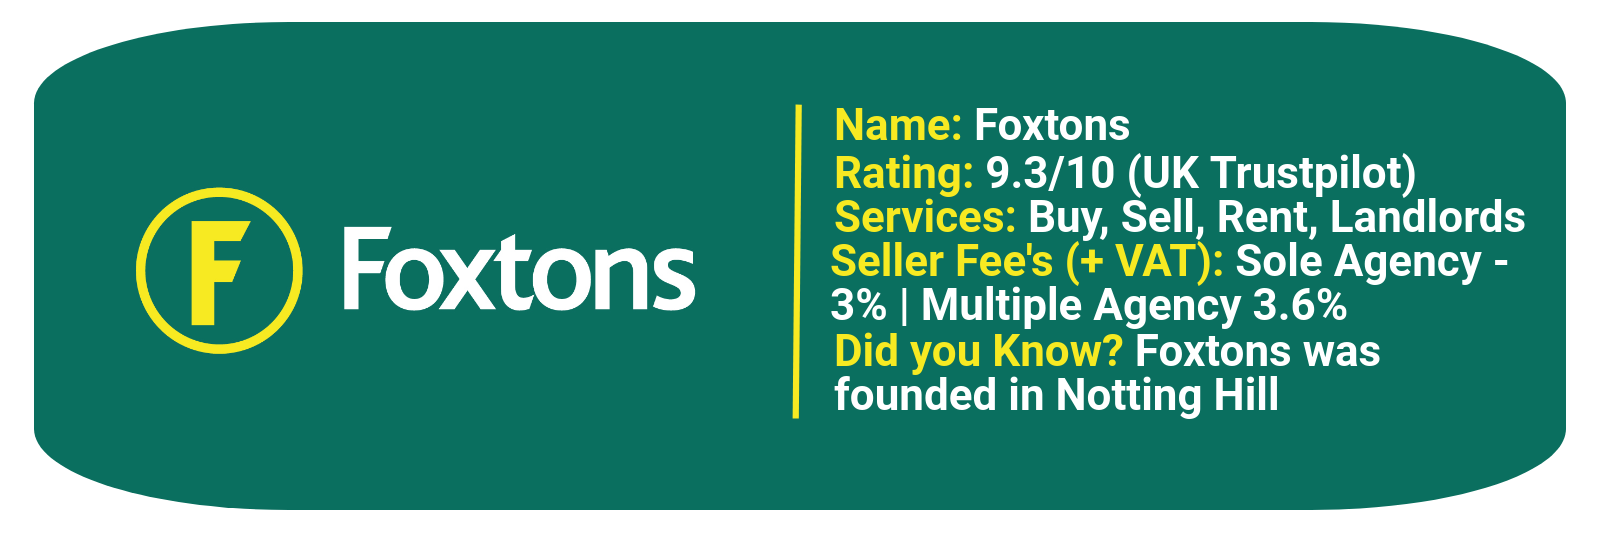 Foxtons statistics featuring rating, services & seller fee's